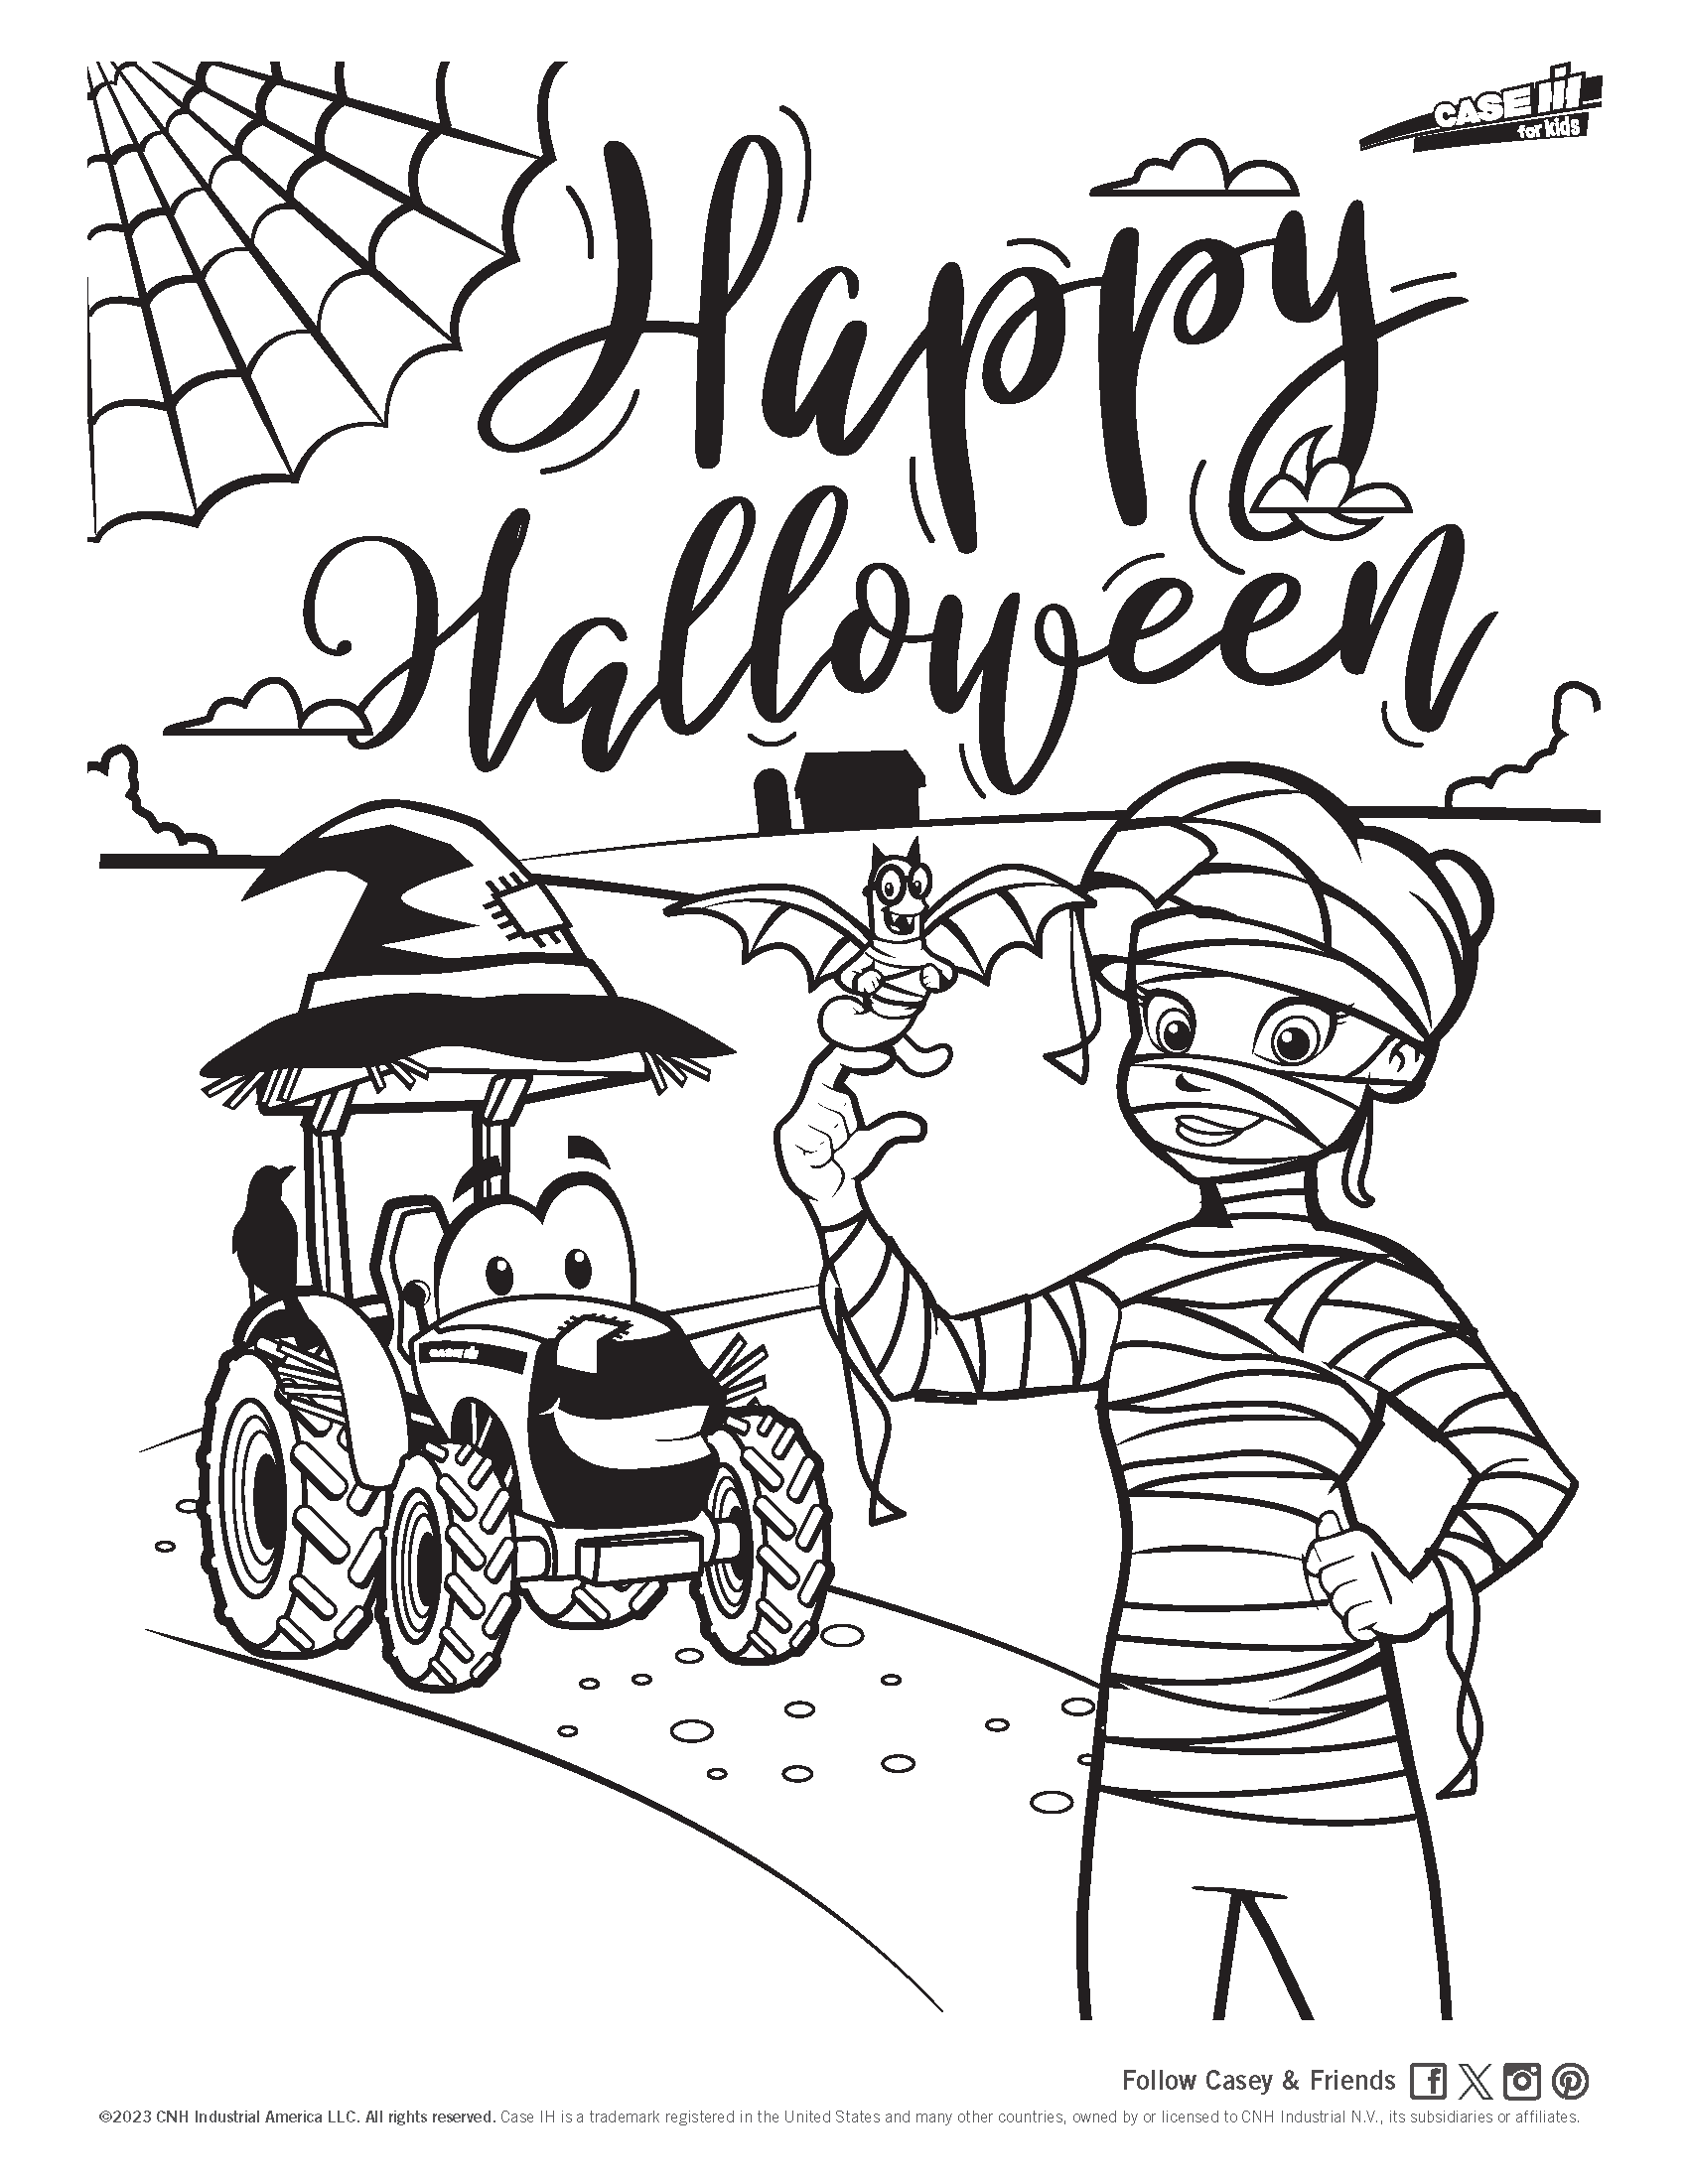 Casey_and_Friends_Halloween_Coloring_Page_2.png